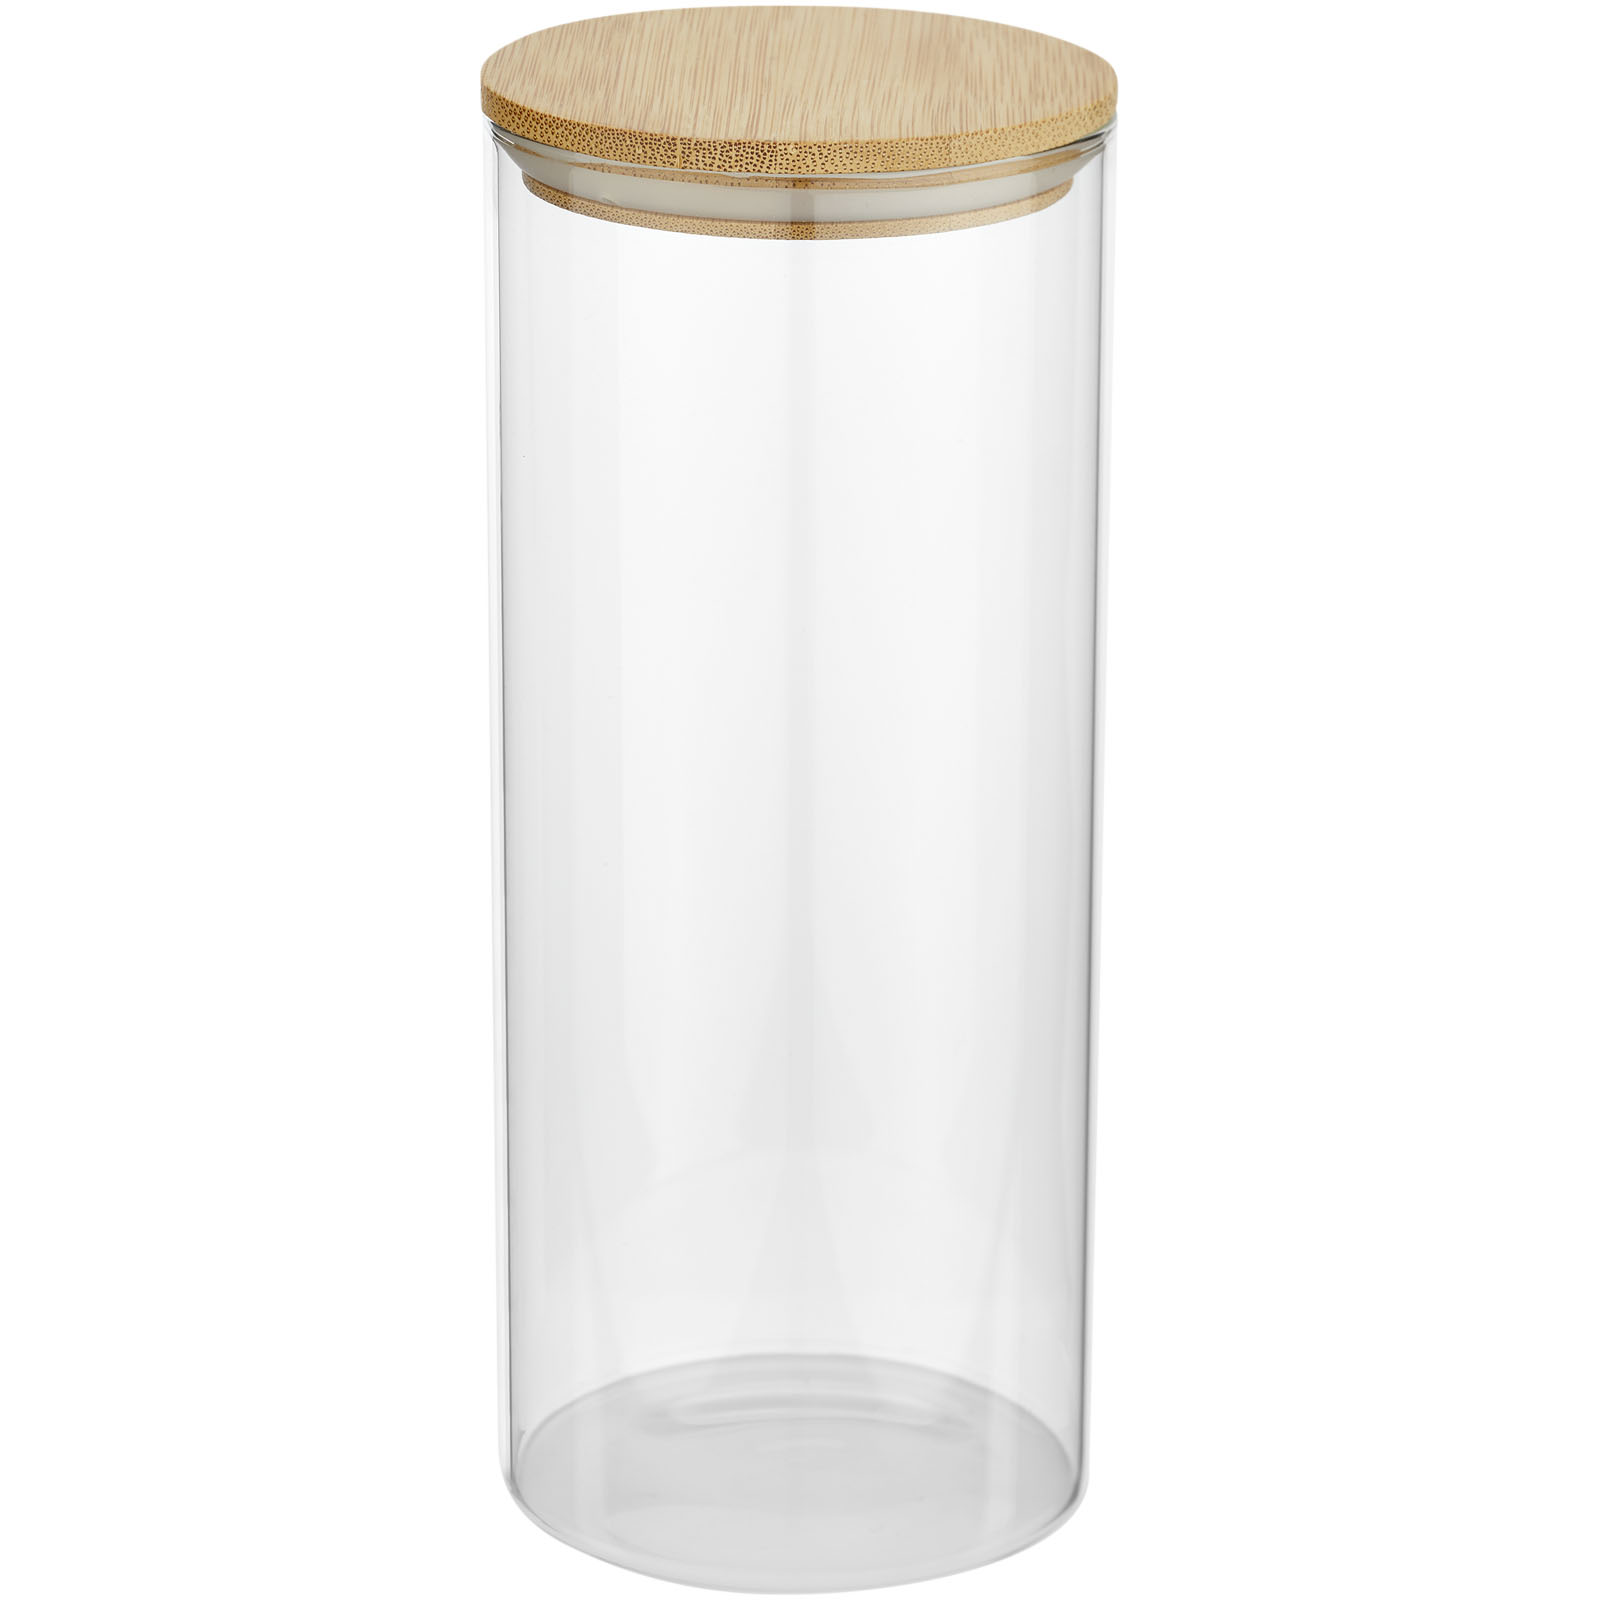 Advertising Kitchenware - Boley 940 ml glass food container